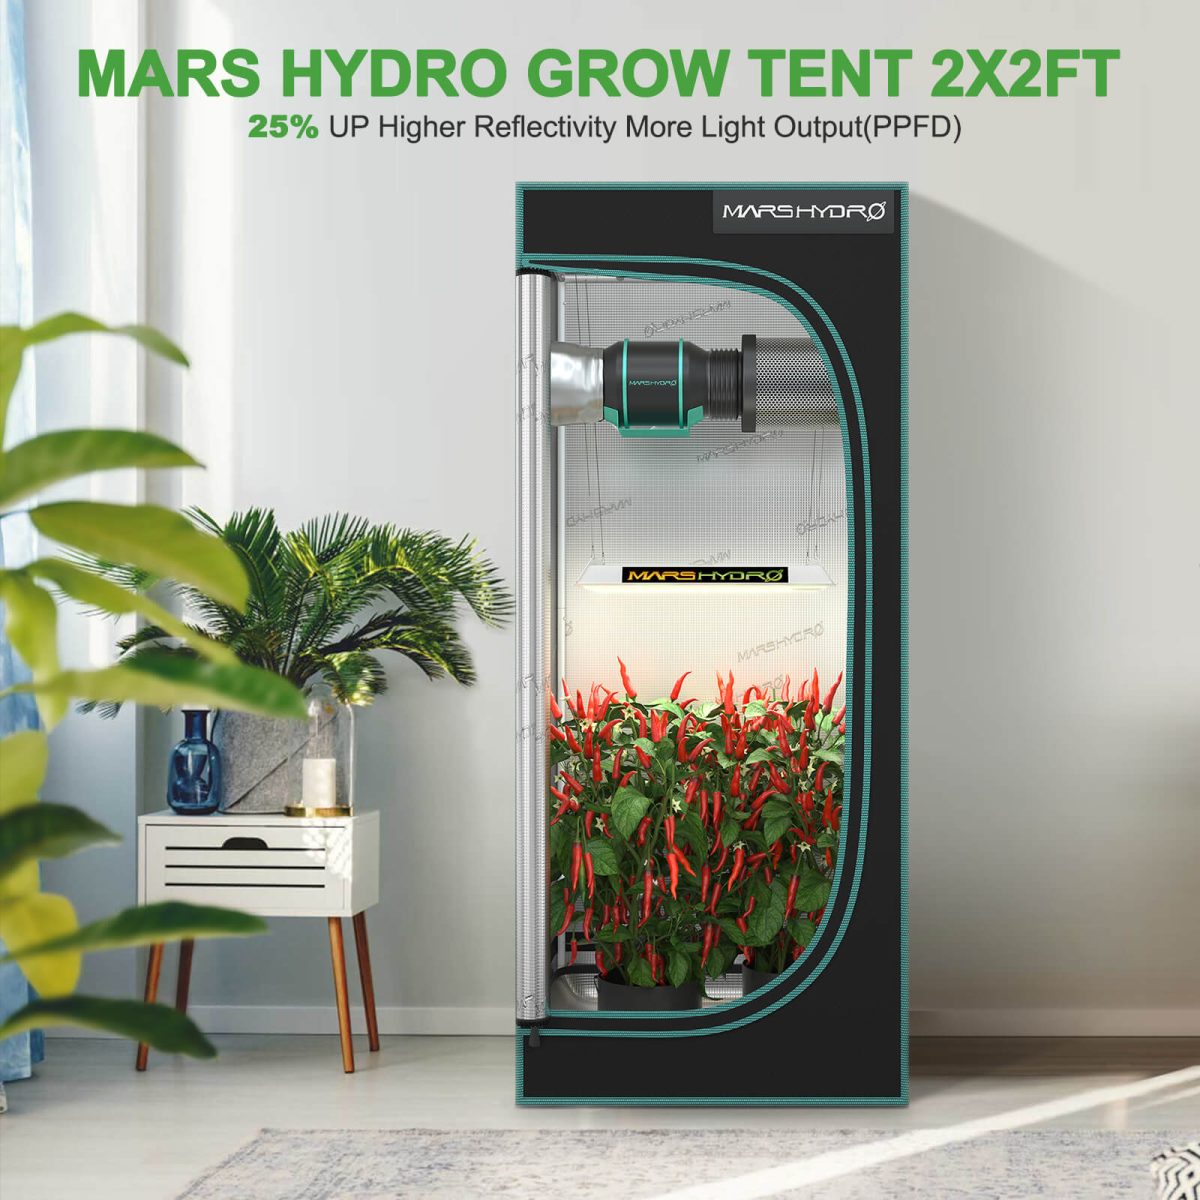 Best matched with Mars Hydro 2x2 tent, 25% up higher reflectivity more light output